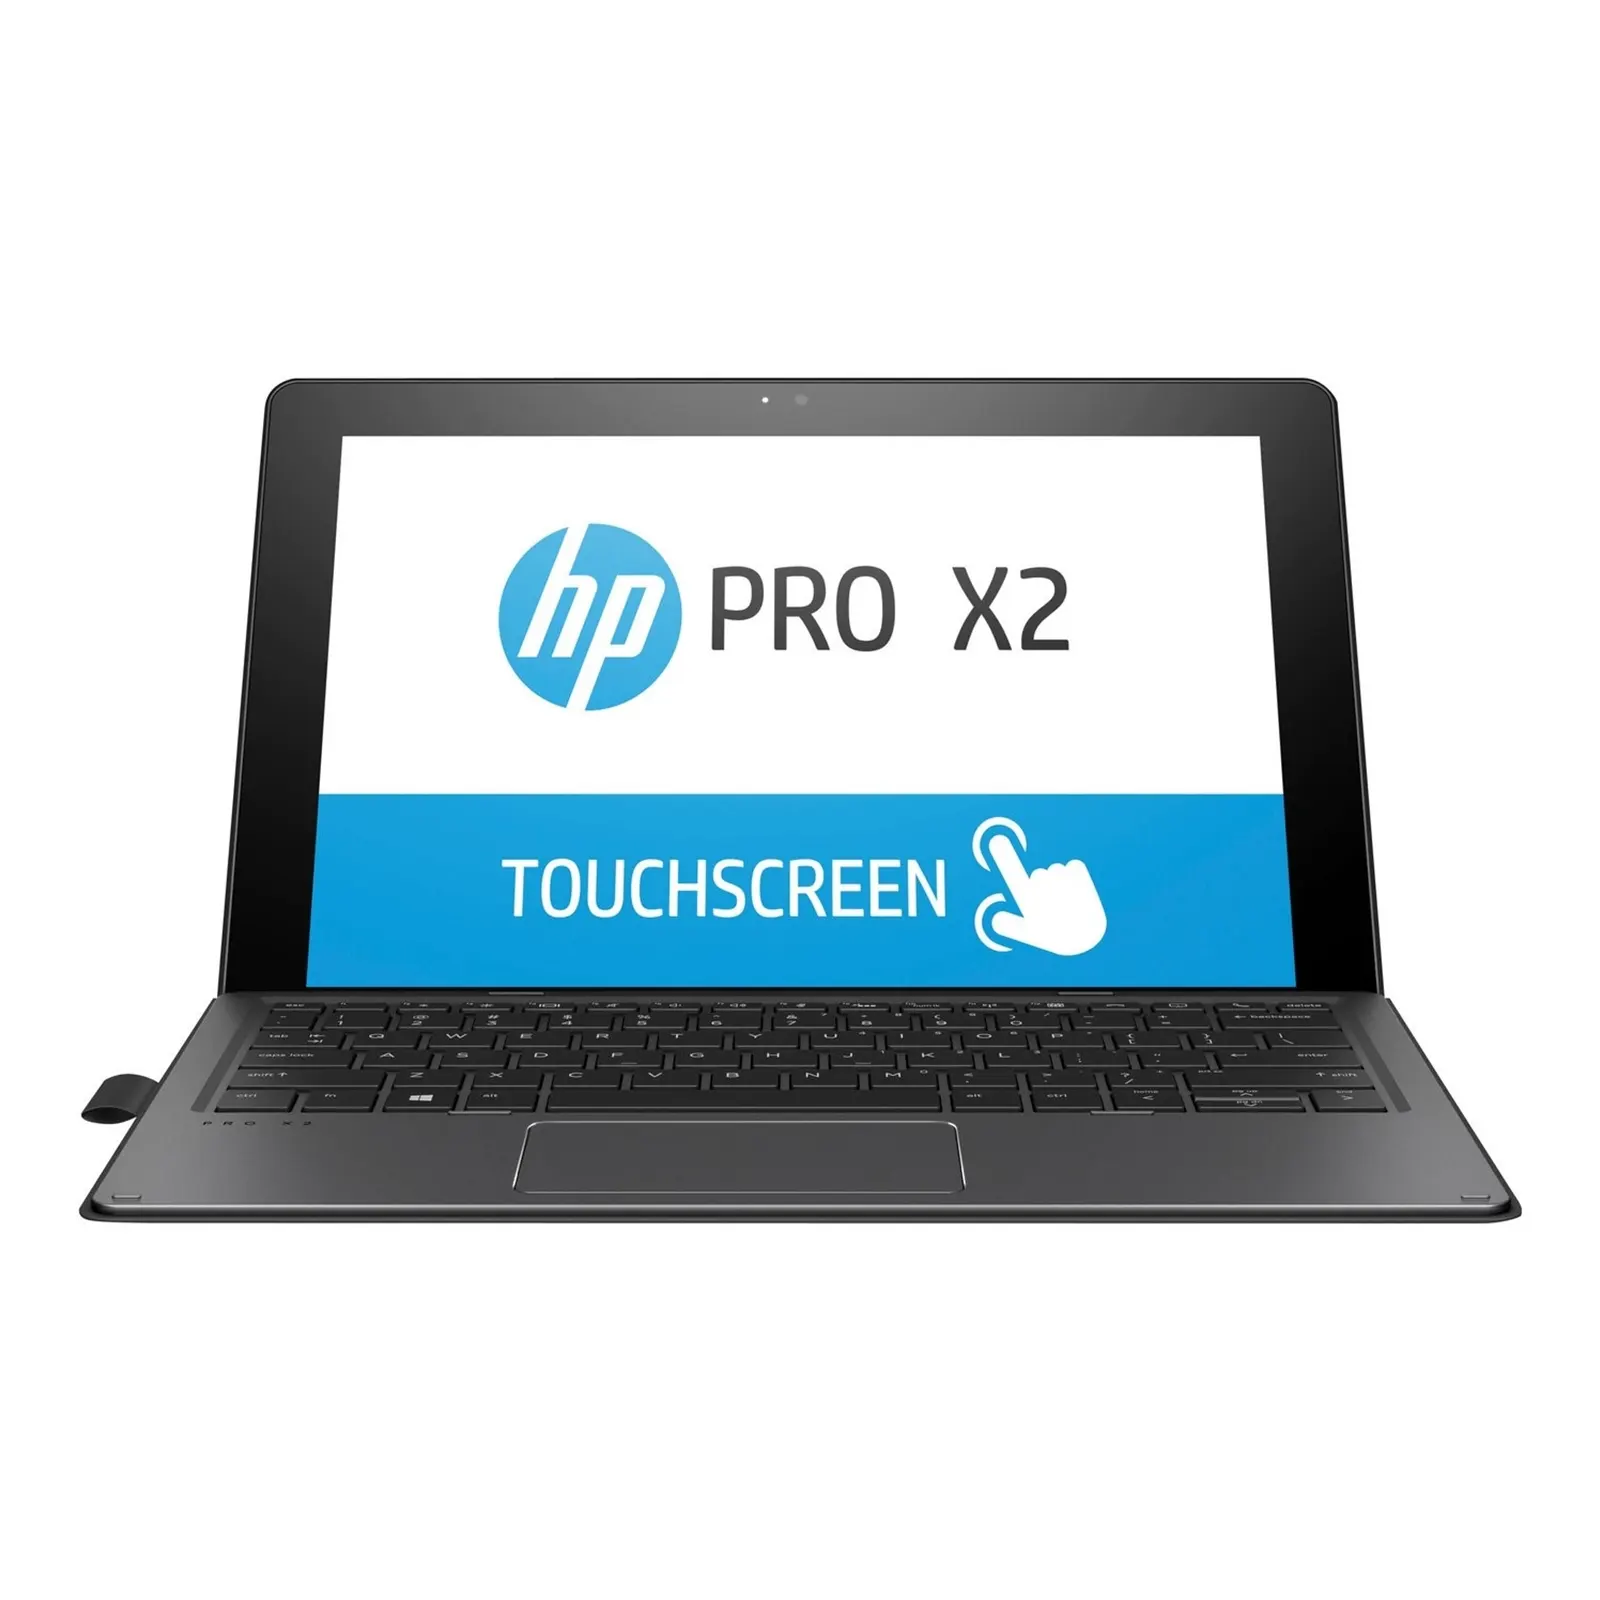 HP Pro x2 612 G2, 12 Inch FHD Screen, Intel Core i5, 4GB RAM, 128GB SSD Touchscreen Convertible Tablet With Keyboard, Windows 10 Pro